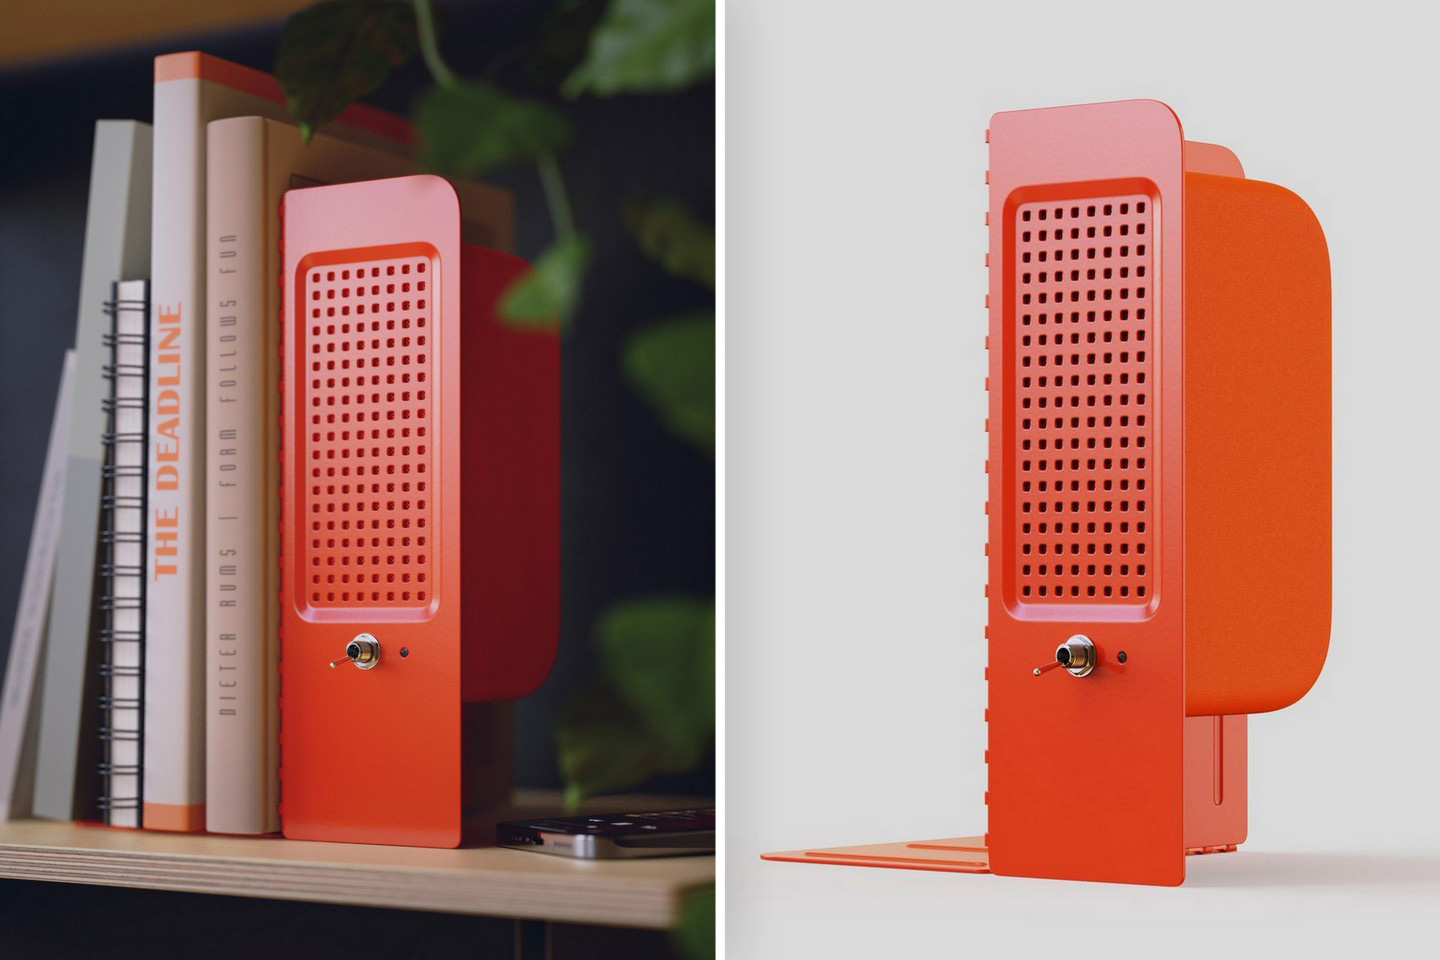 This bookend is also a Bluetooth speaker that can read out audiobooks